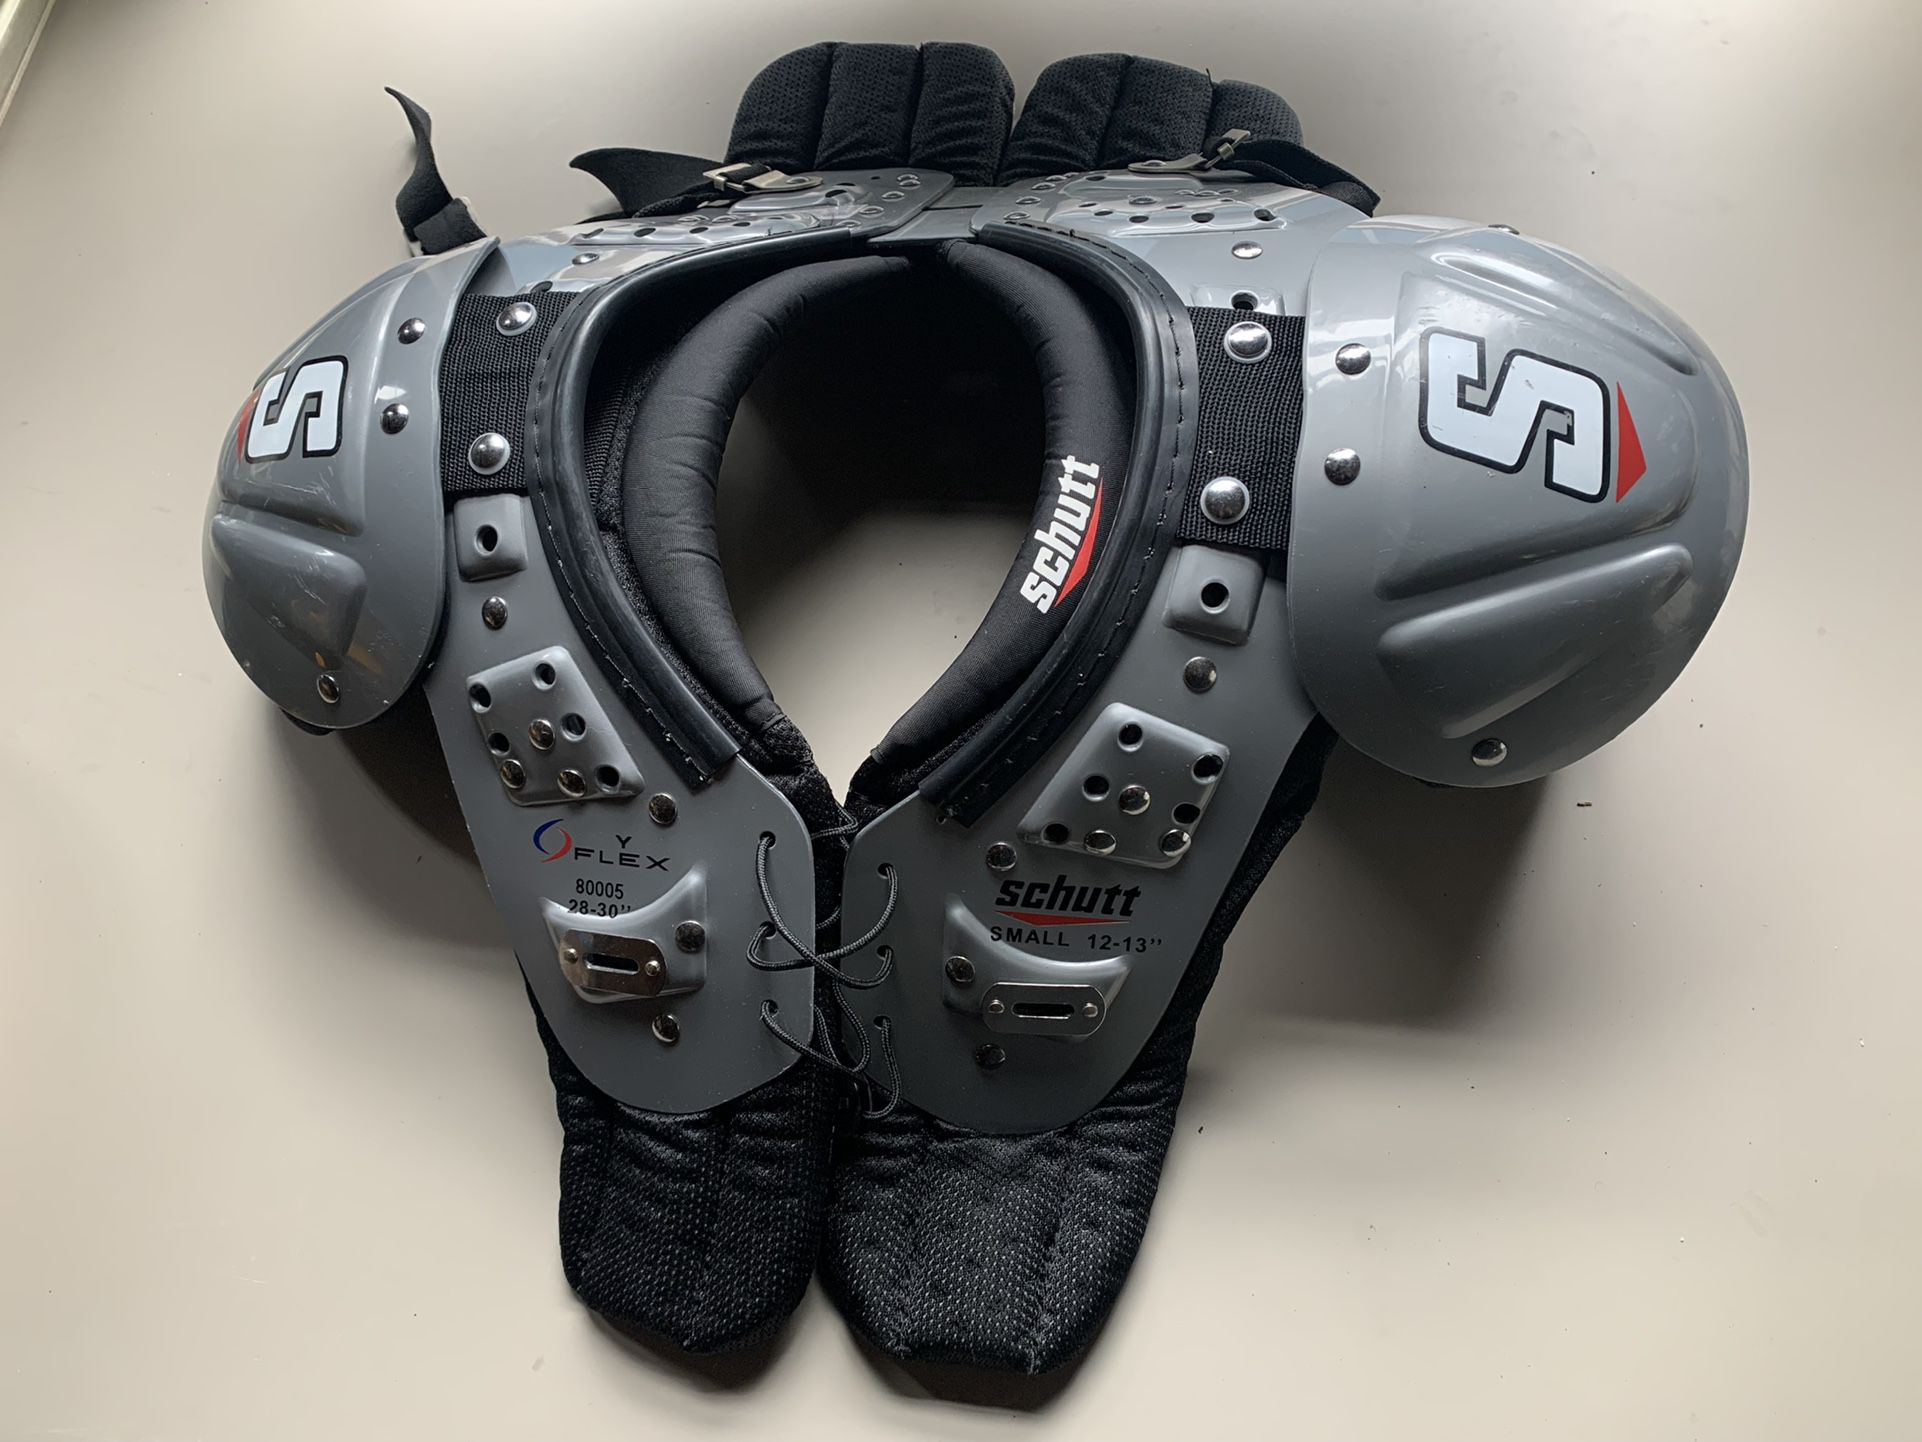 Youth Football Shoulder Pads